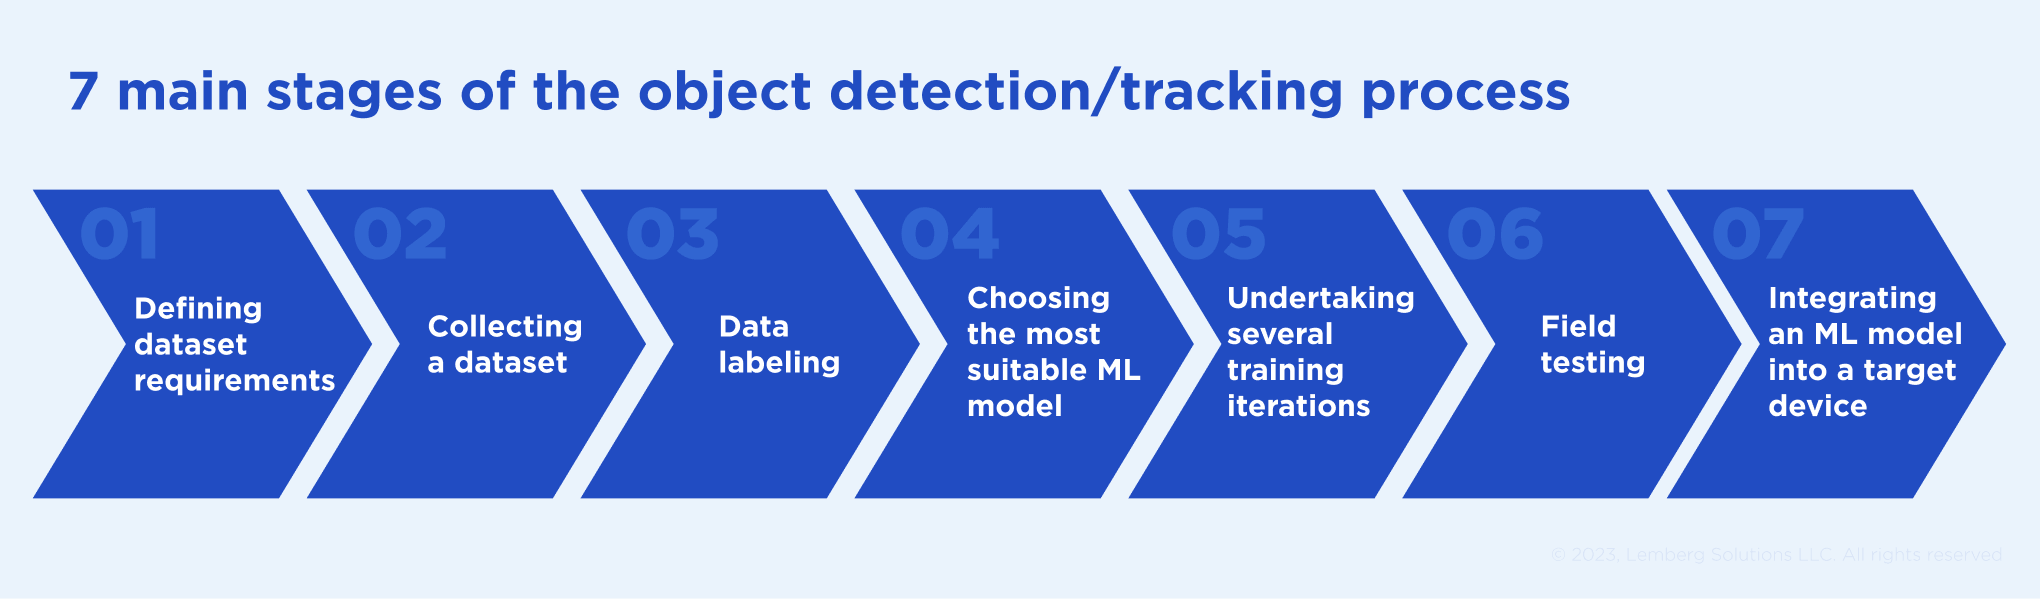 Object Detection and Object Tracking Explained - Real Examples - 7 stages of object detection and tracking implementation process - Lemberg Solutions